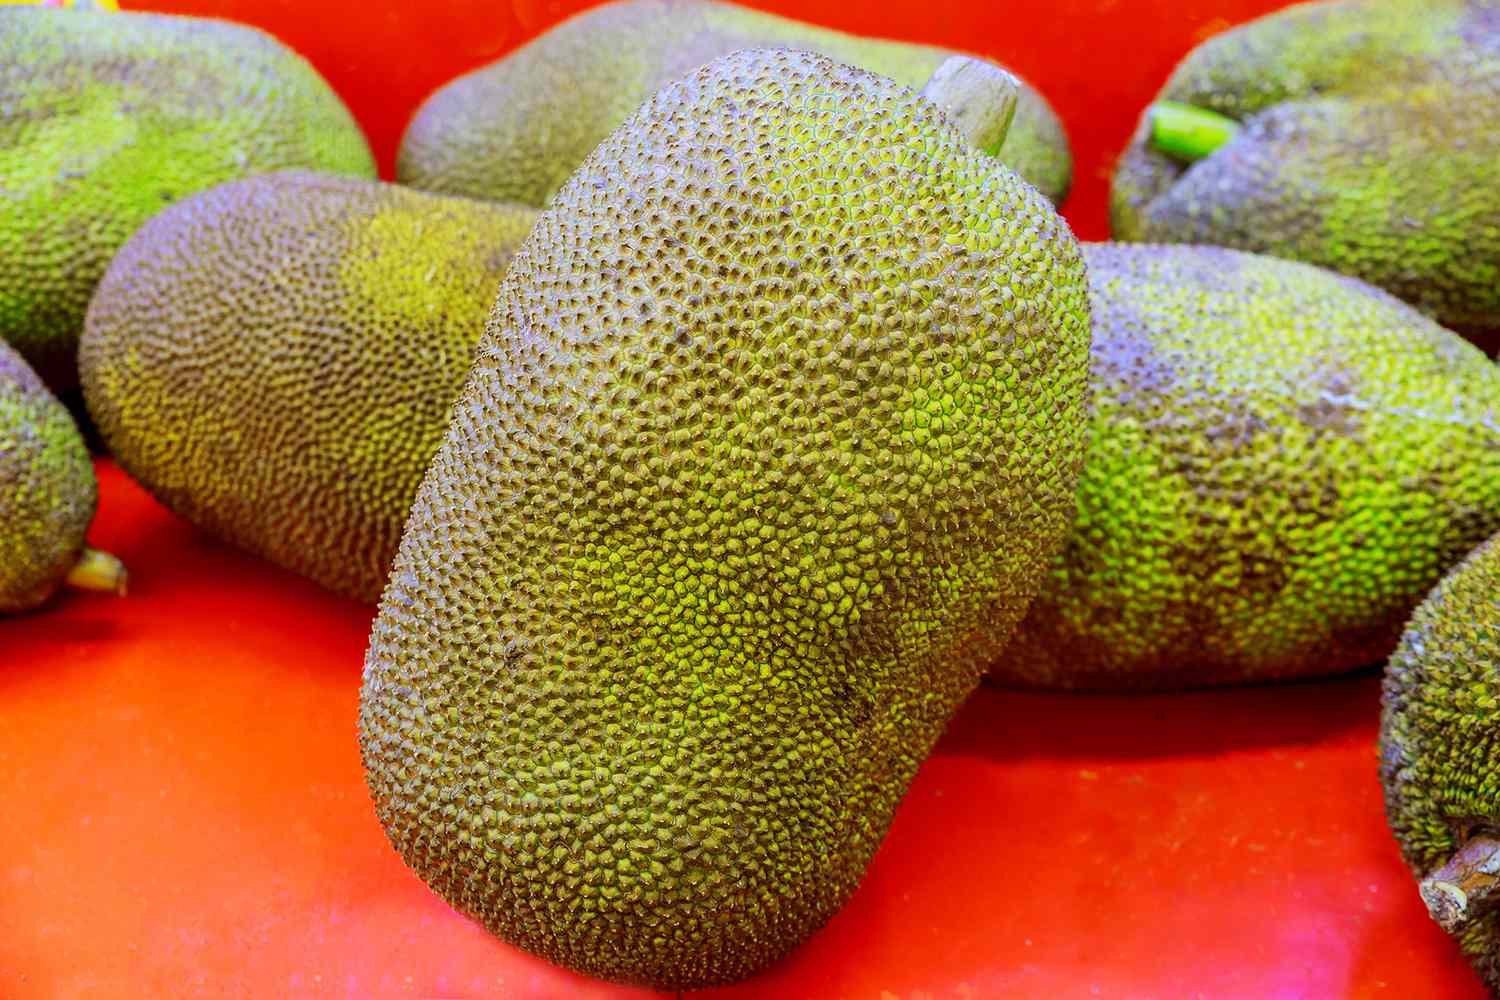 Several whole Jackfruits on a red-orange wooden surface